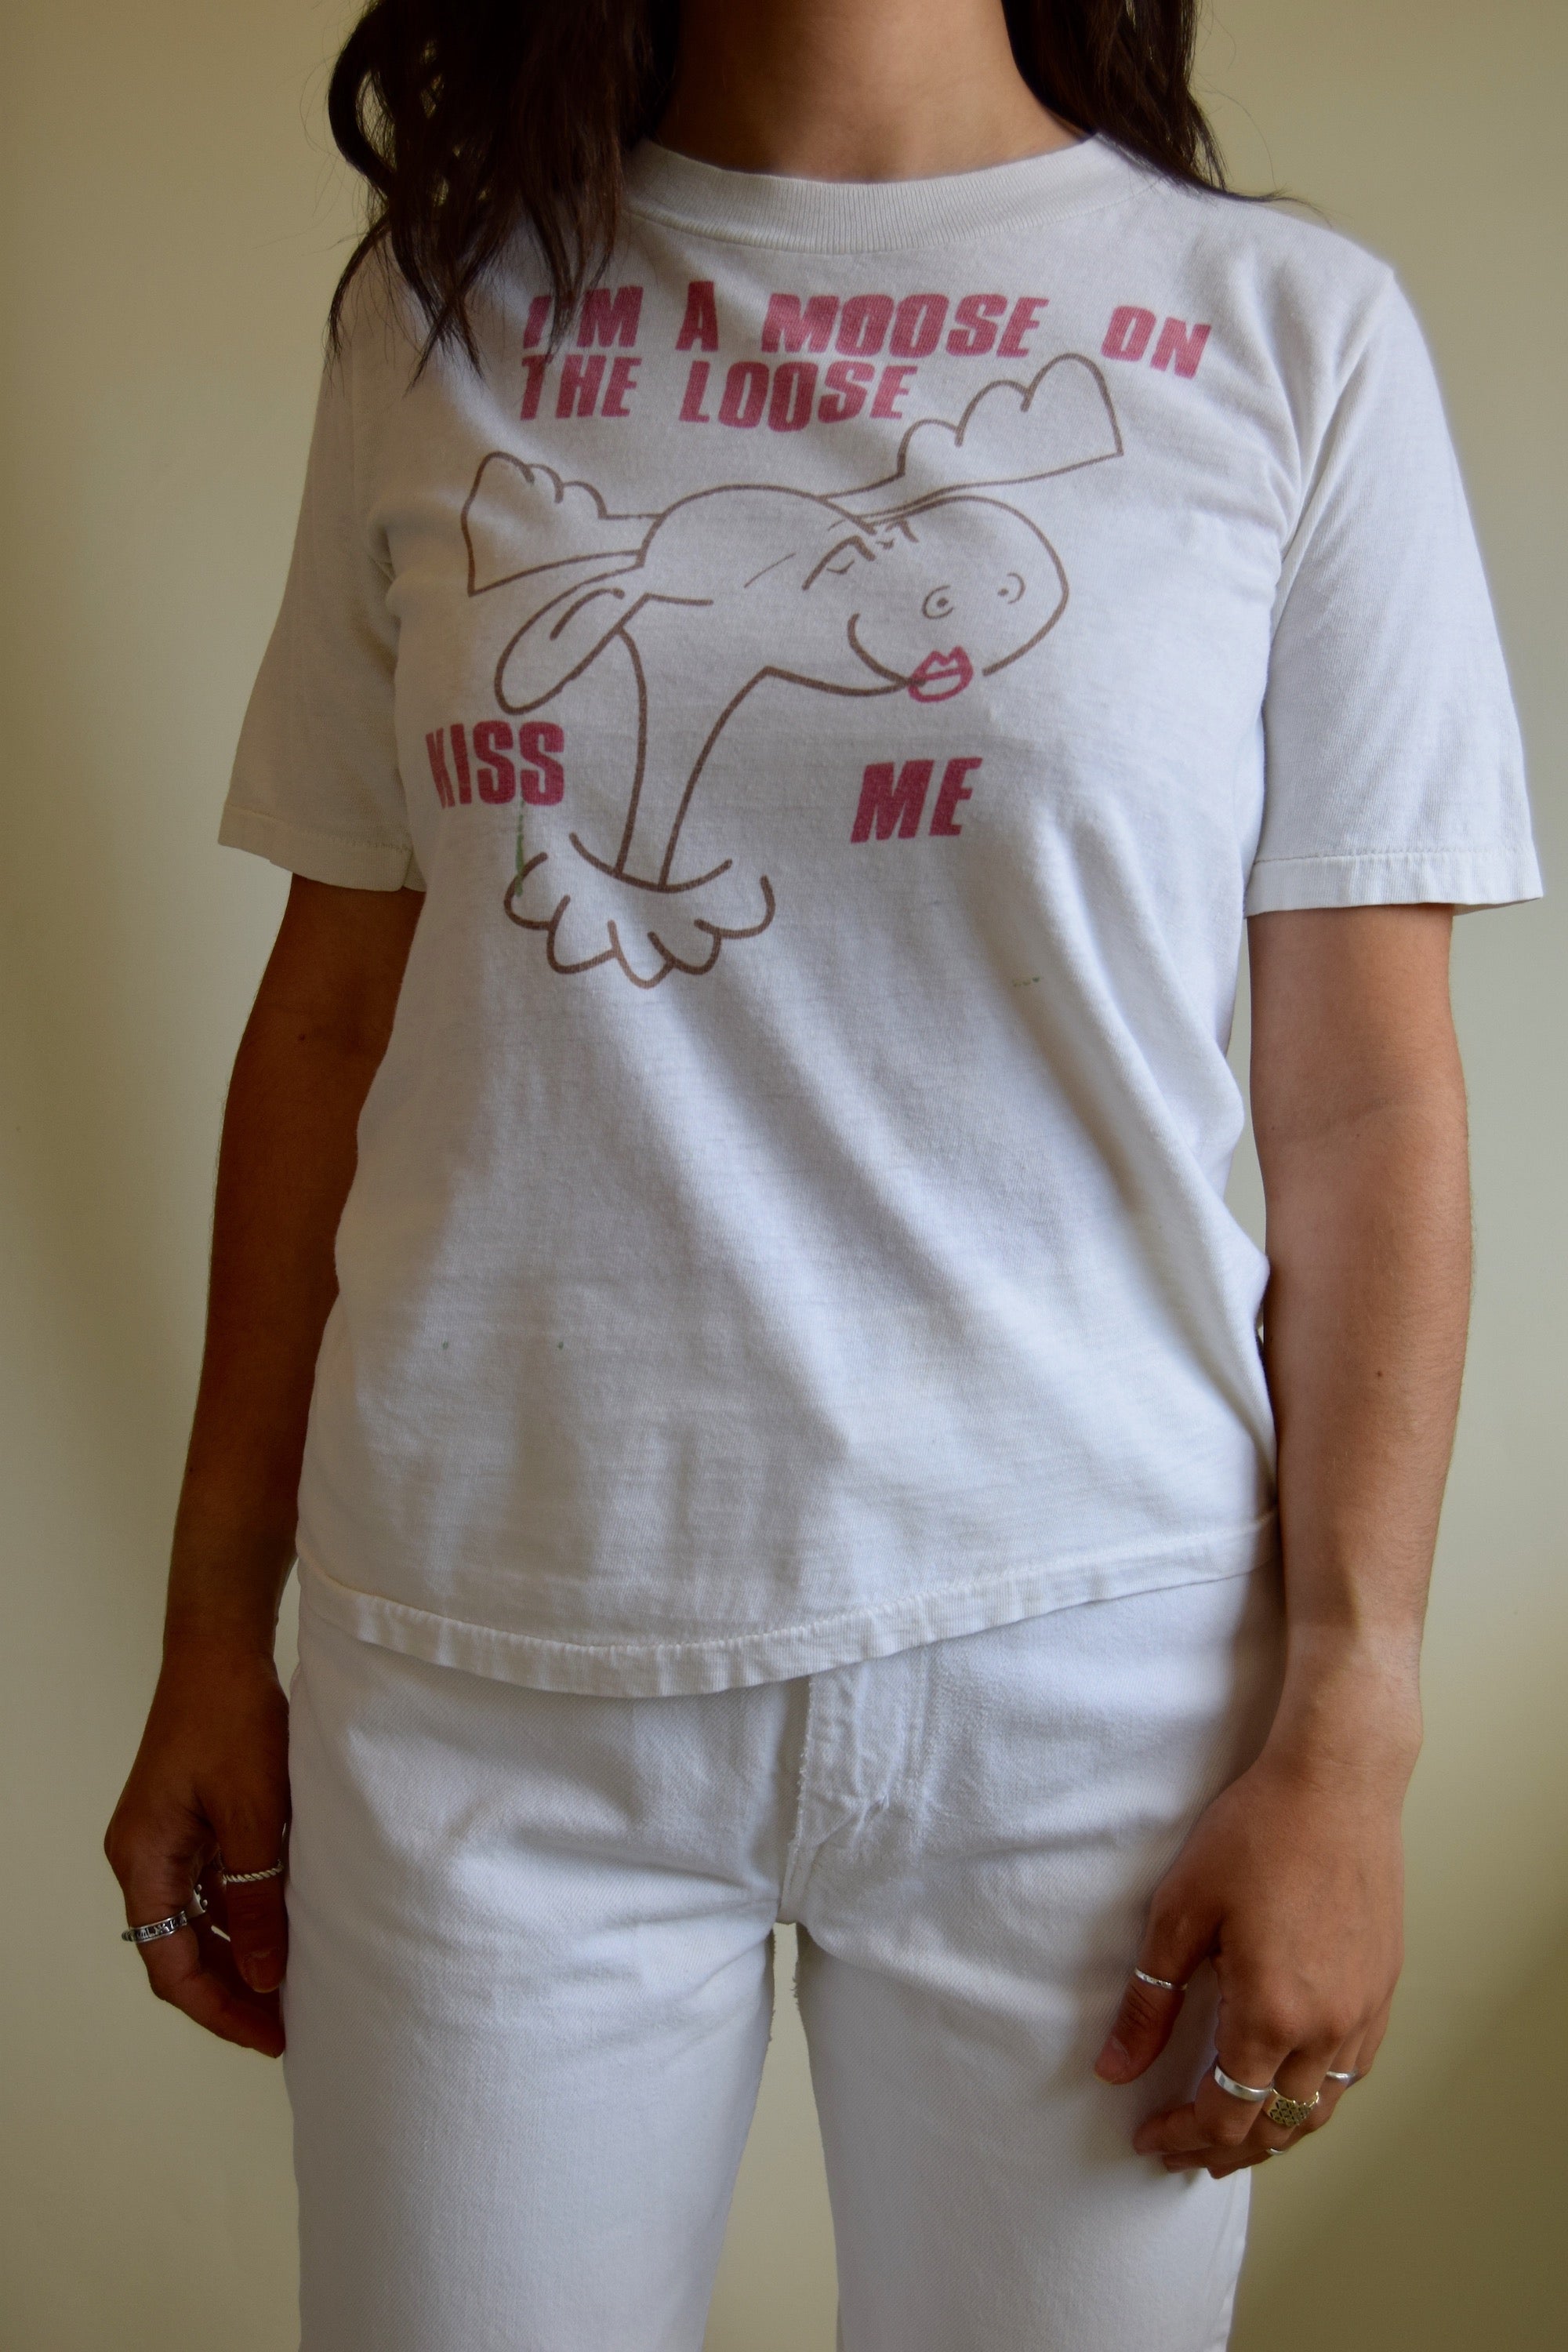 Vintage "Moose On The Loose" T-Shirt